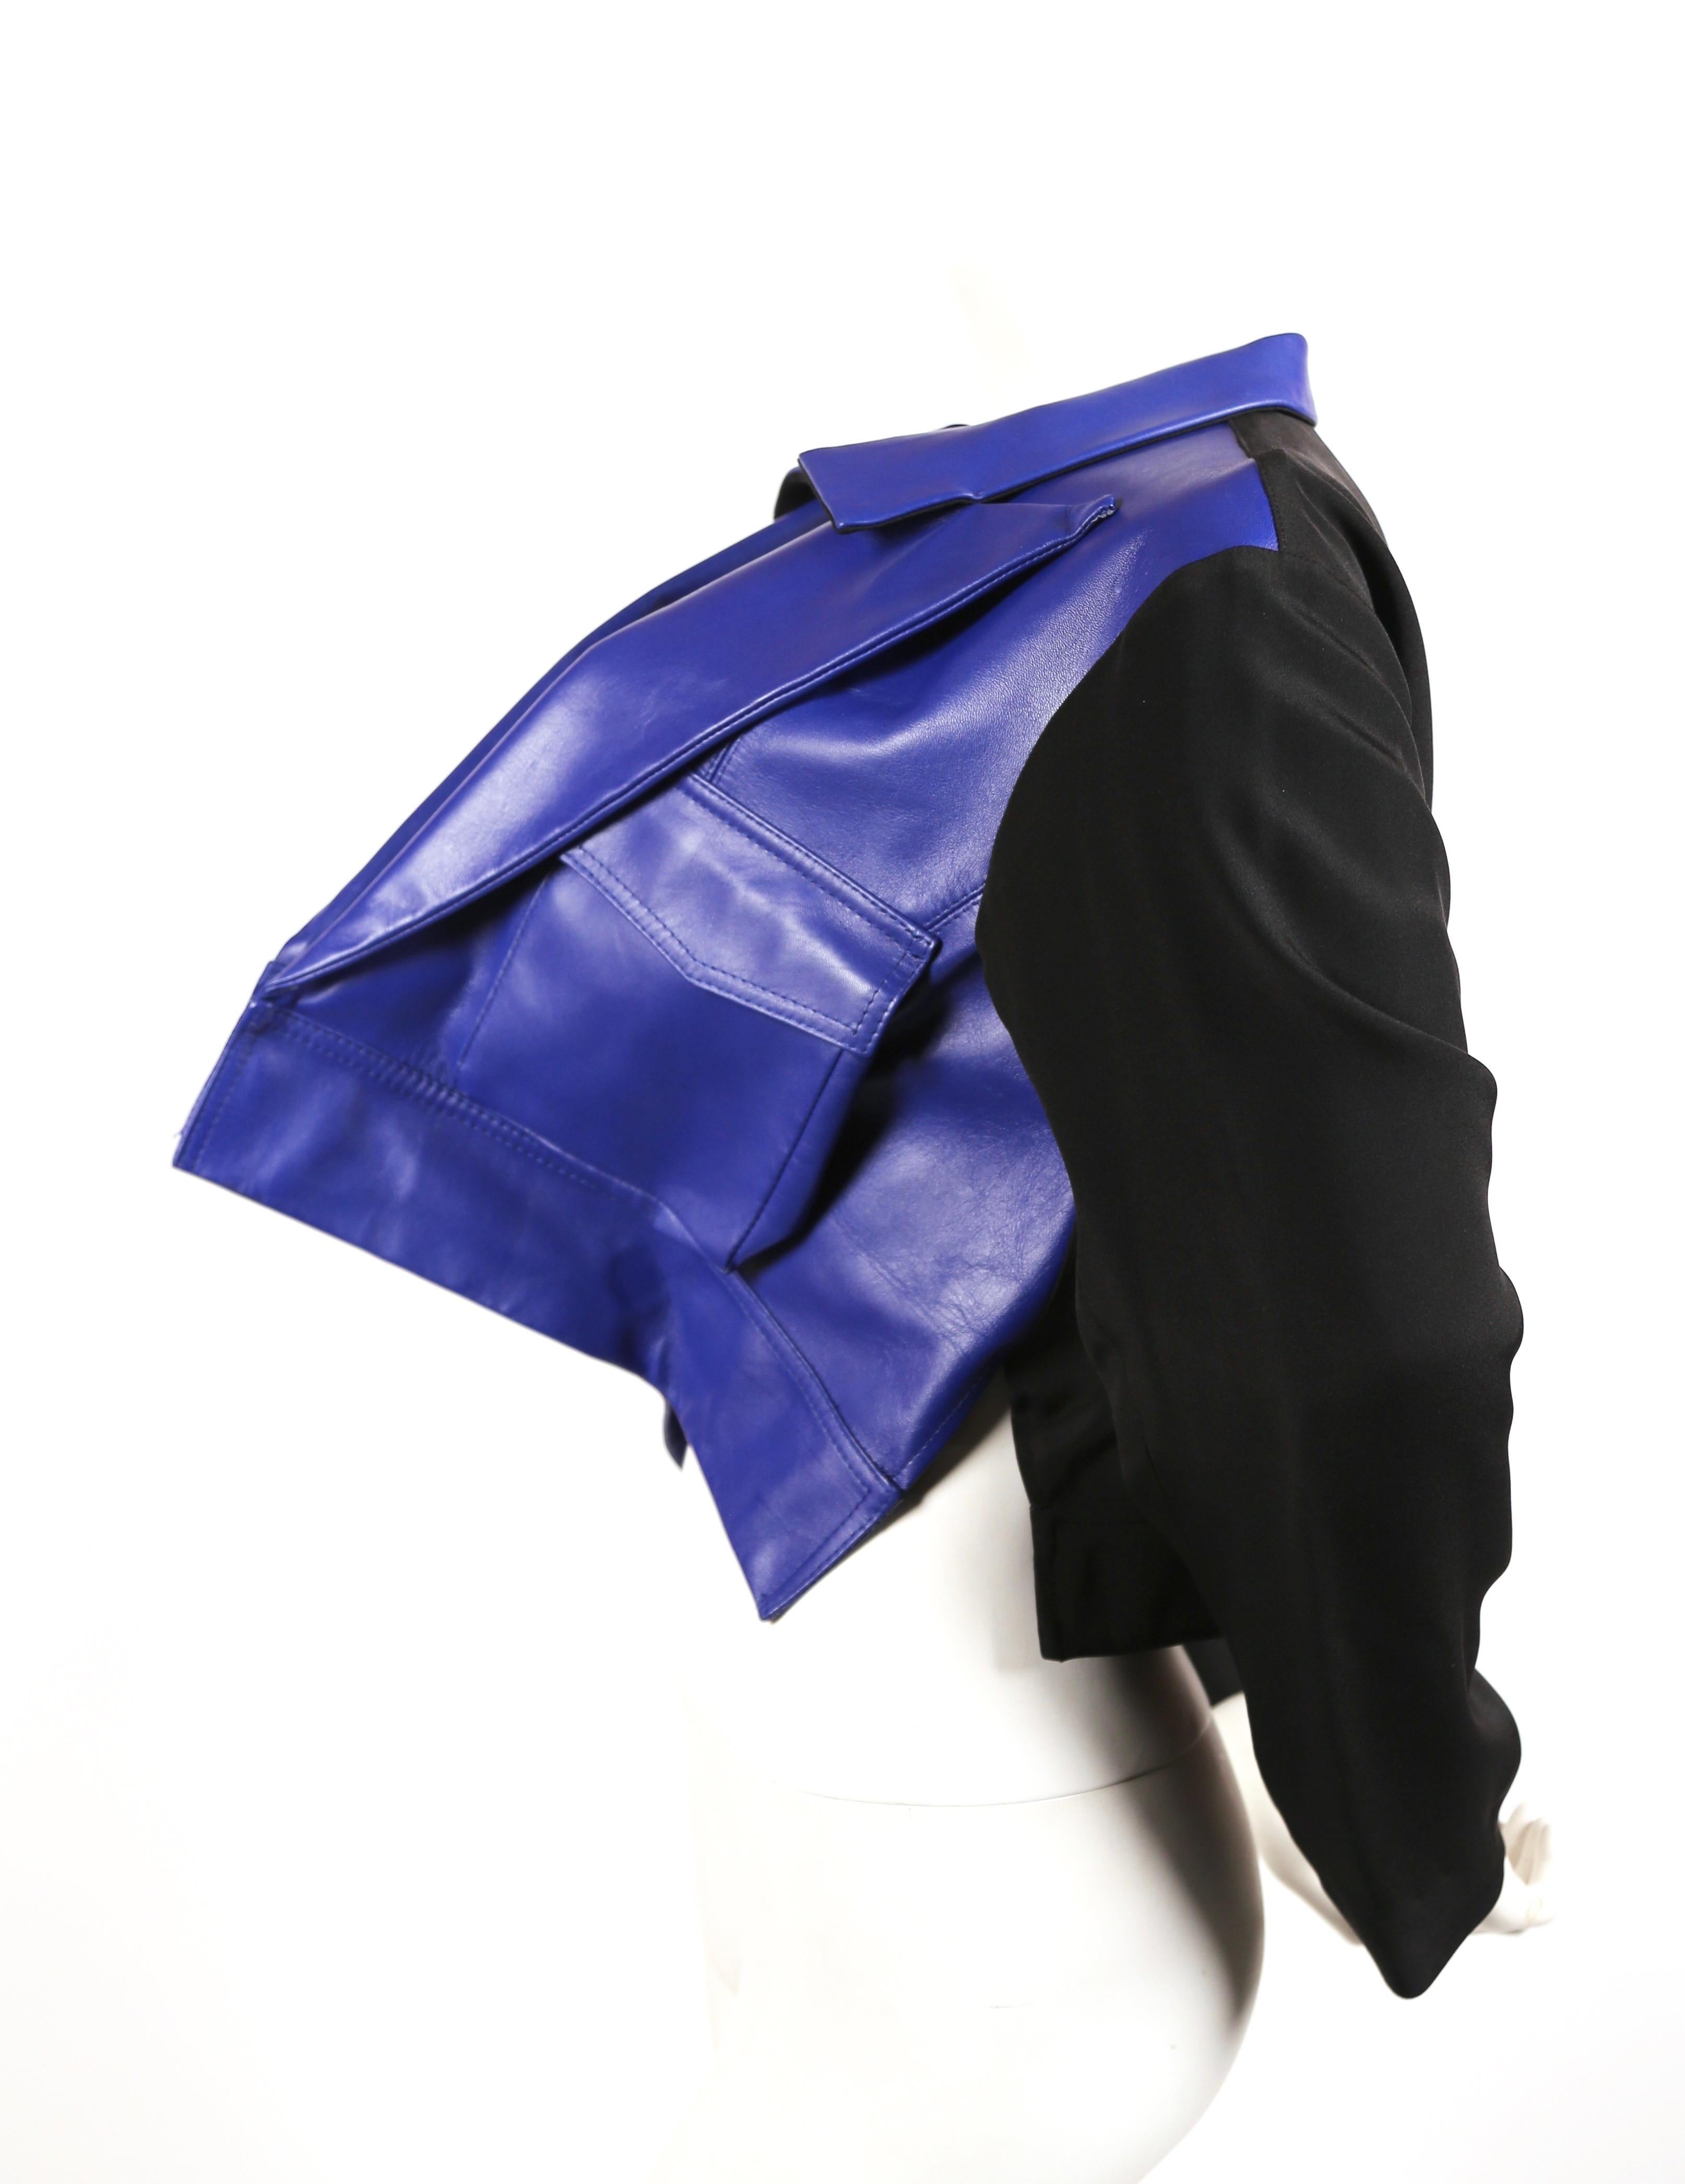 2007 YOHJI YAMAMOTO blue leather runway jacket with forced front - NEW with tags For Sale 1